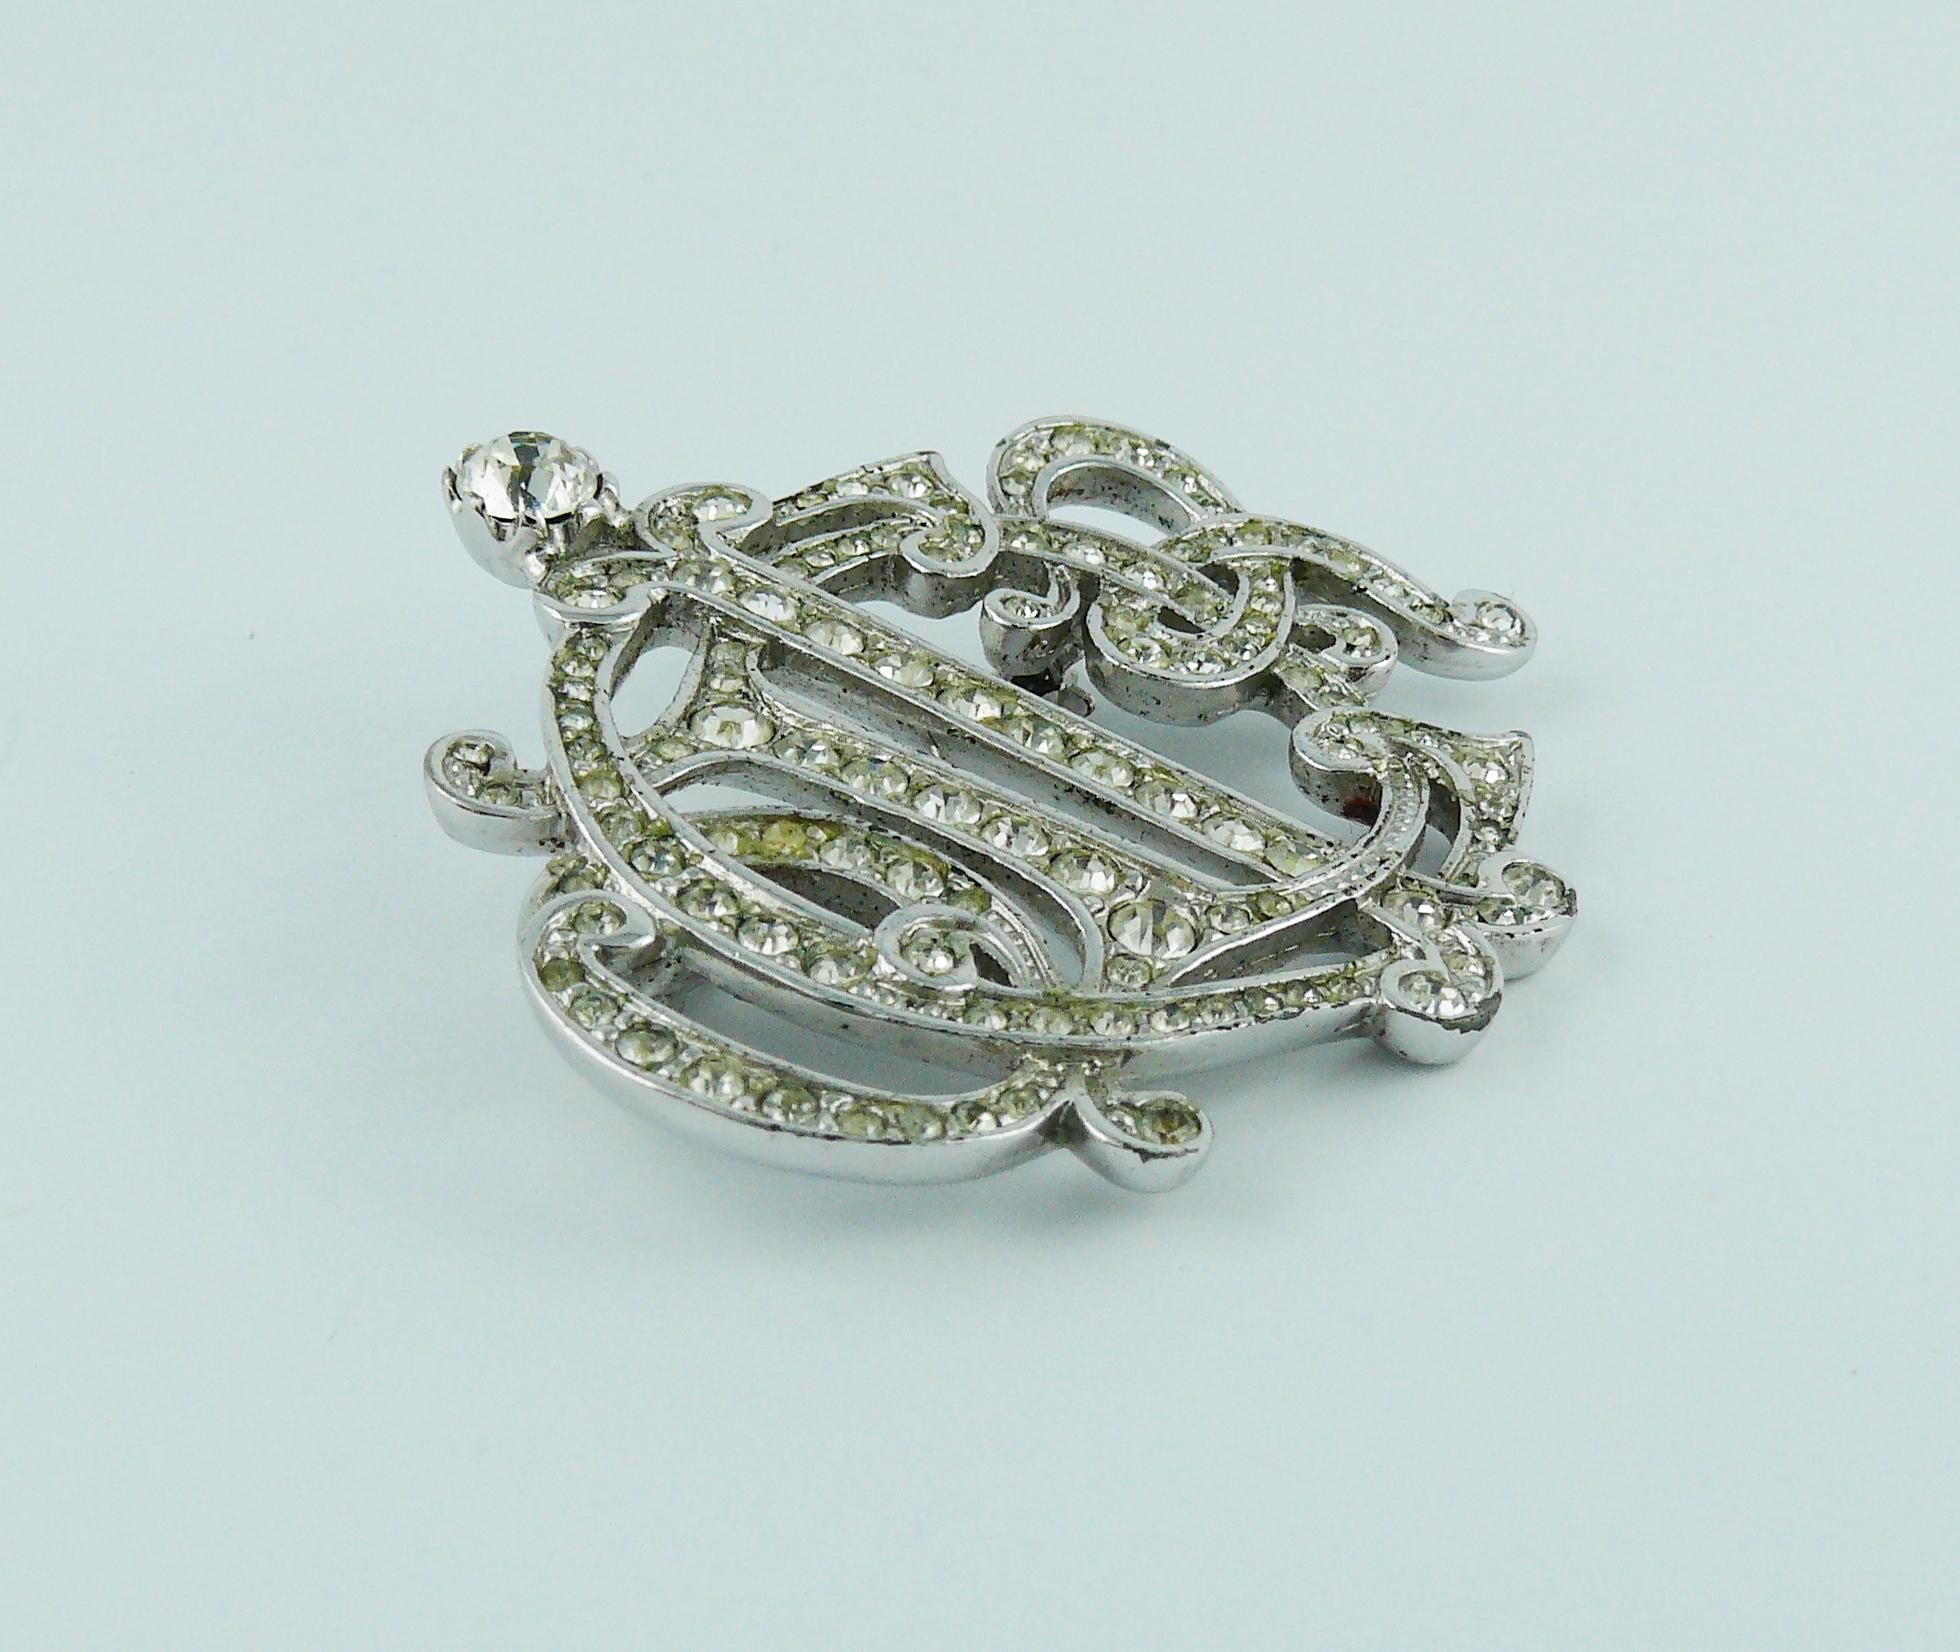 CHRISTIAN DIOR silver toned insigna diamante brooch featuring combined 